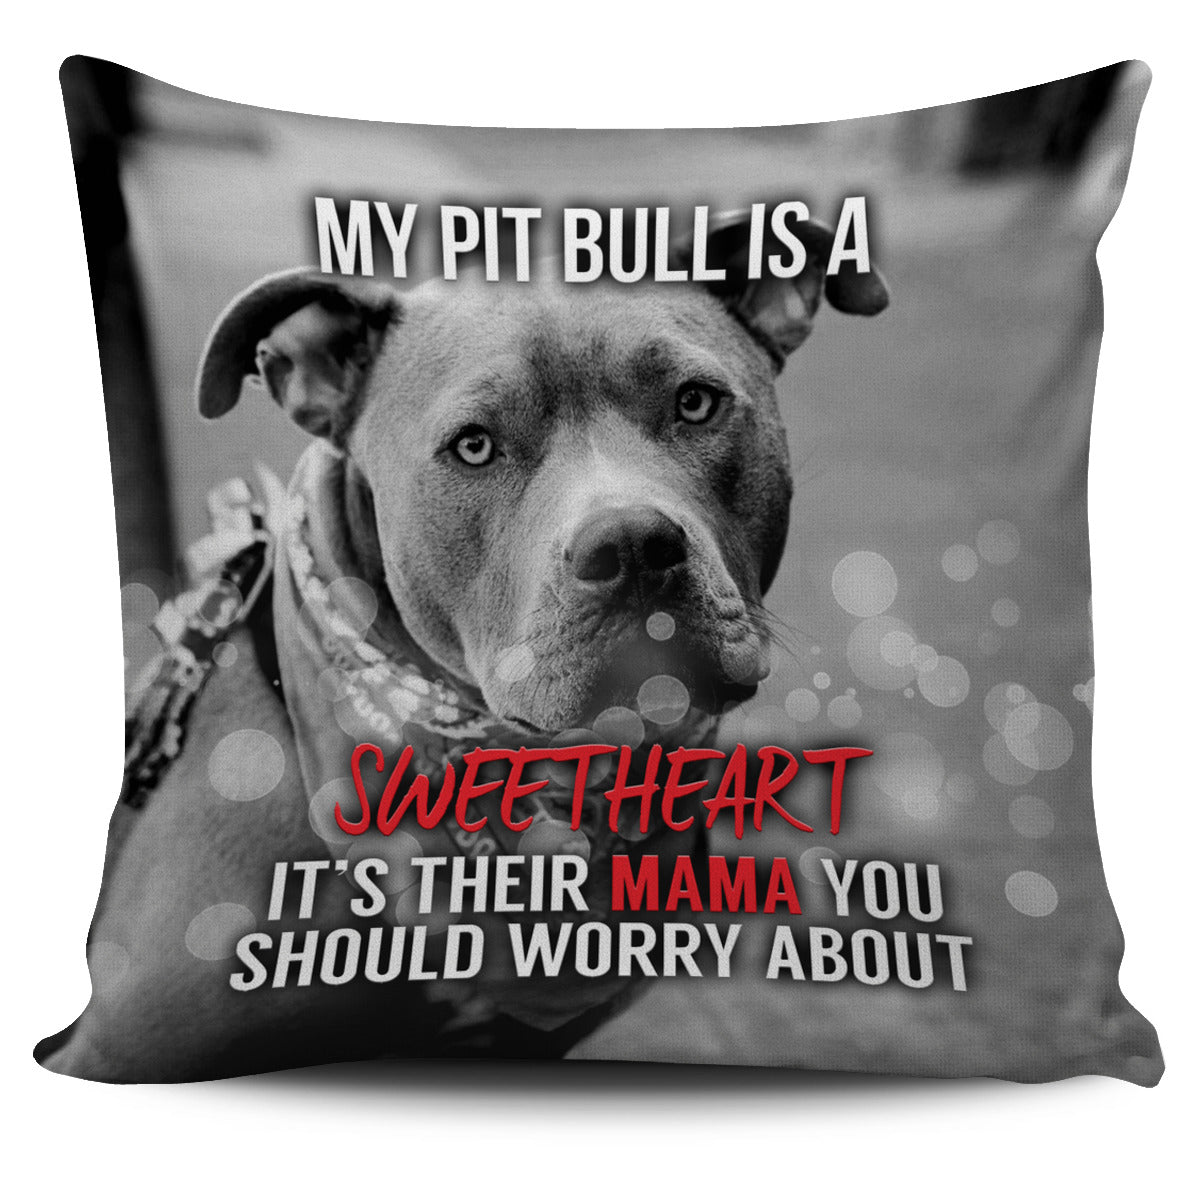 My Pit Is A Sweetheart Pillow Cover